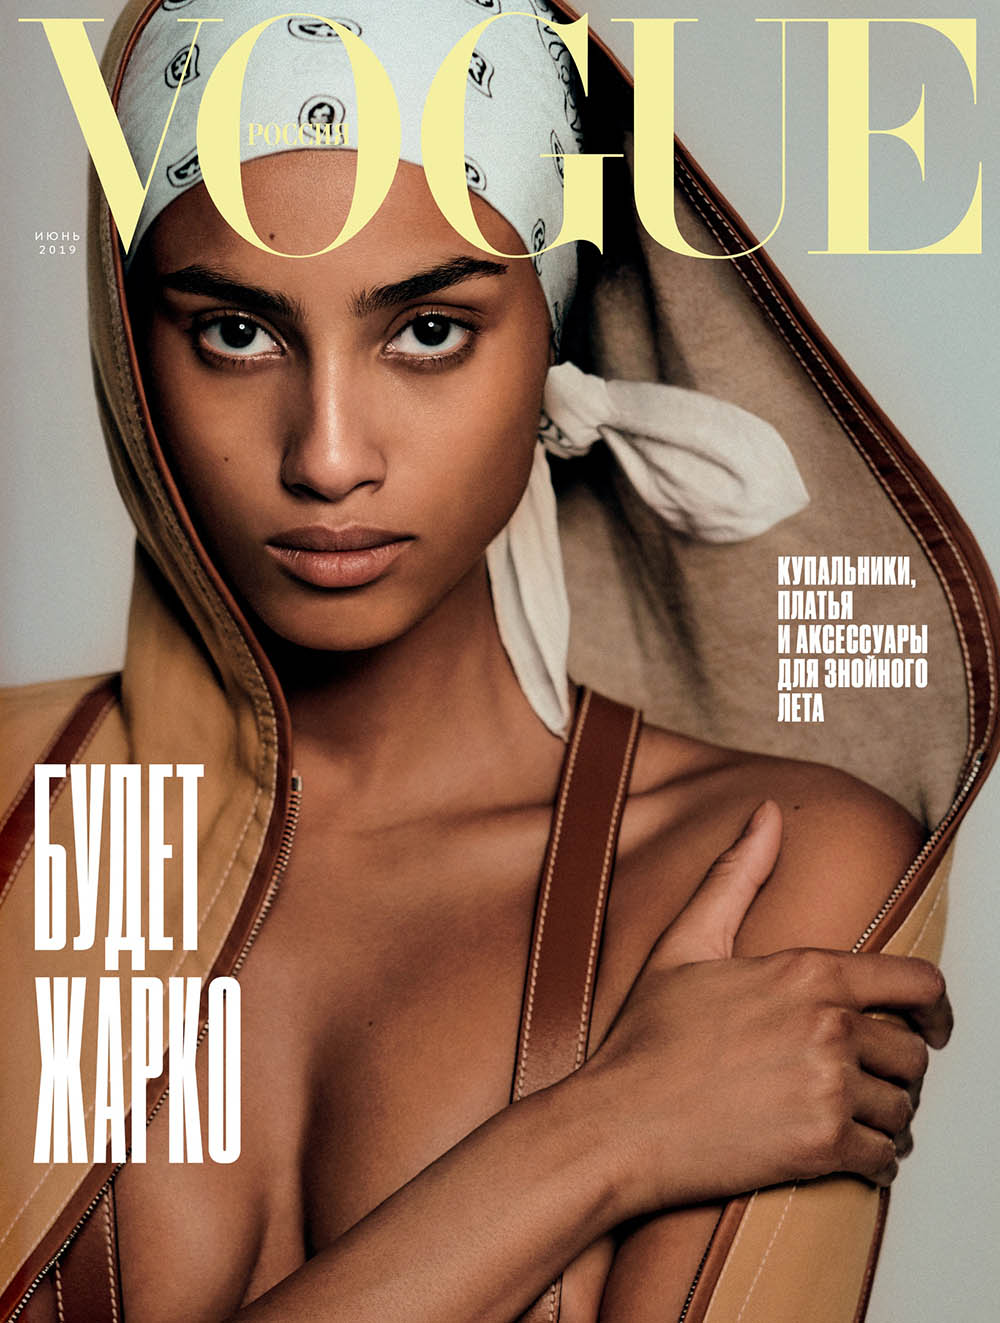 Imaan Hammam covers Vogue Russia June 2019 by Chris Colls